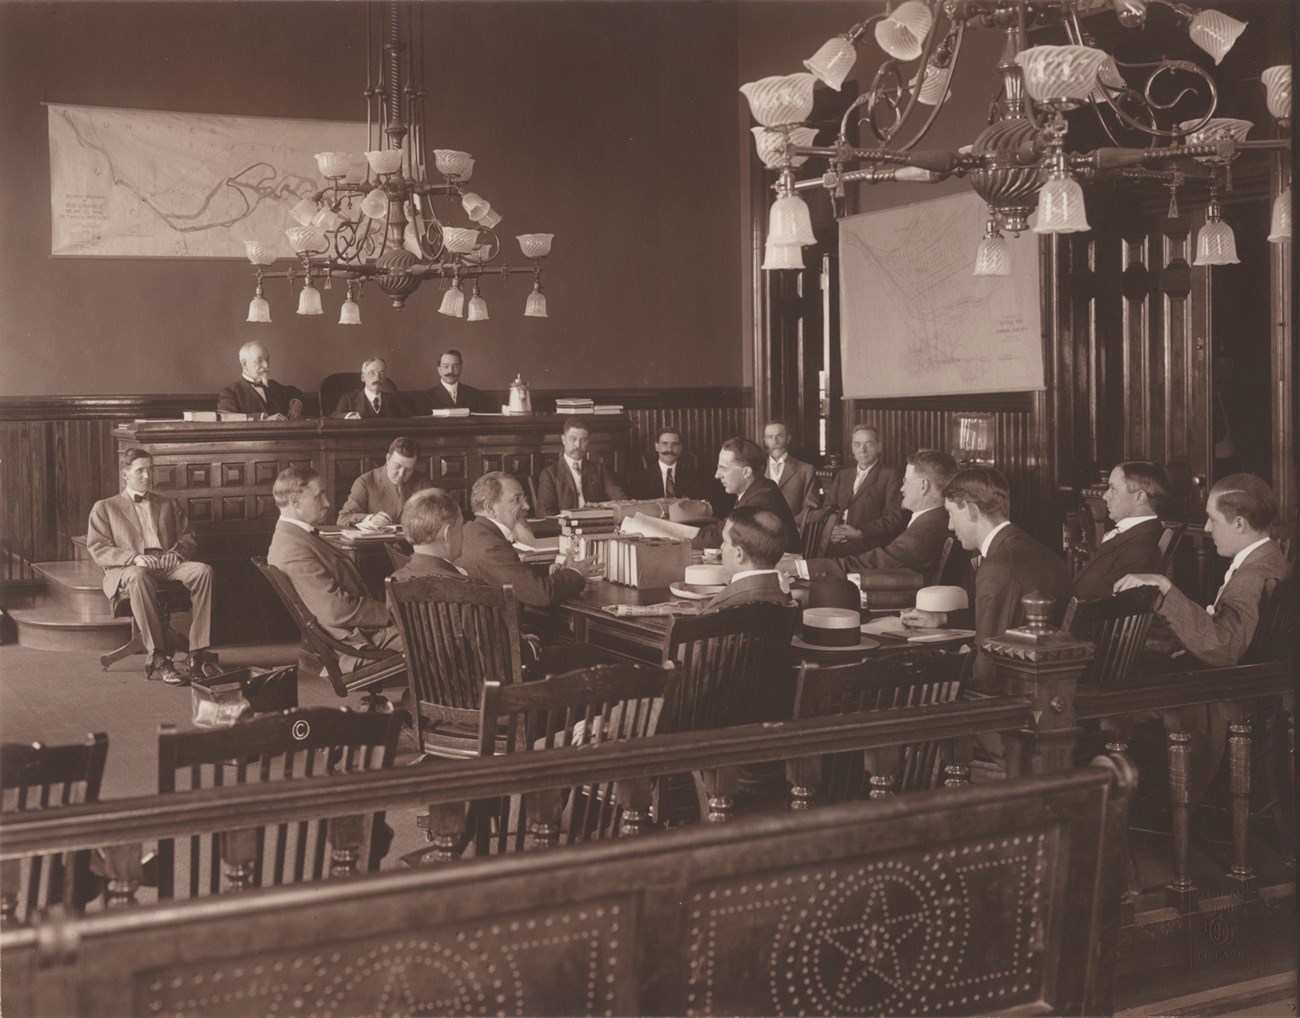 Black-and-white photo of 15 men around a table in an ornate room with paper maps posted on walls. Three commissioners sit behind elevated courtroom bench at far end of room.